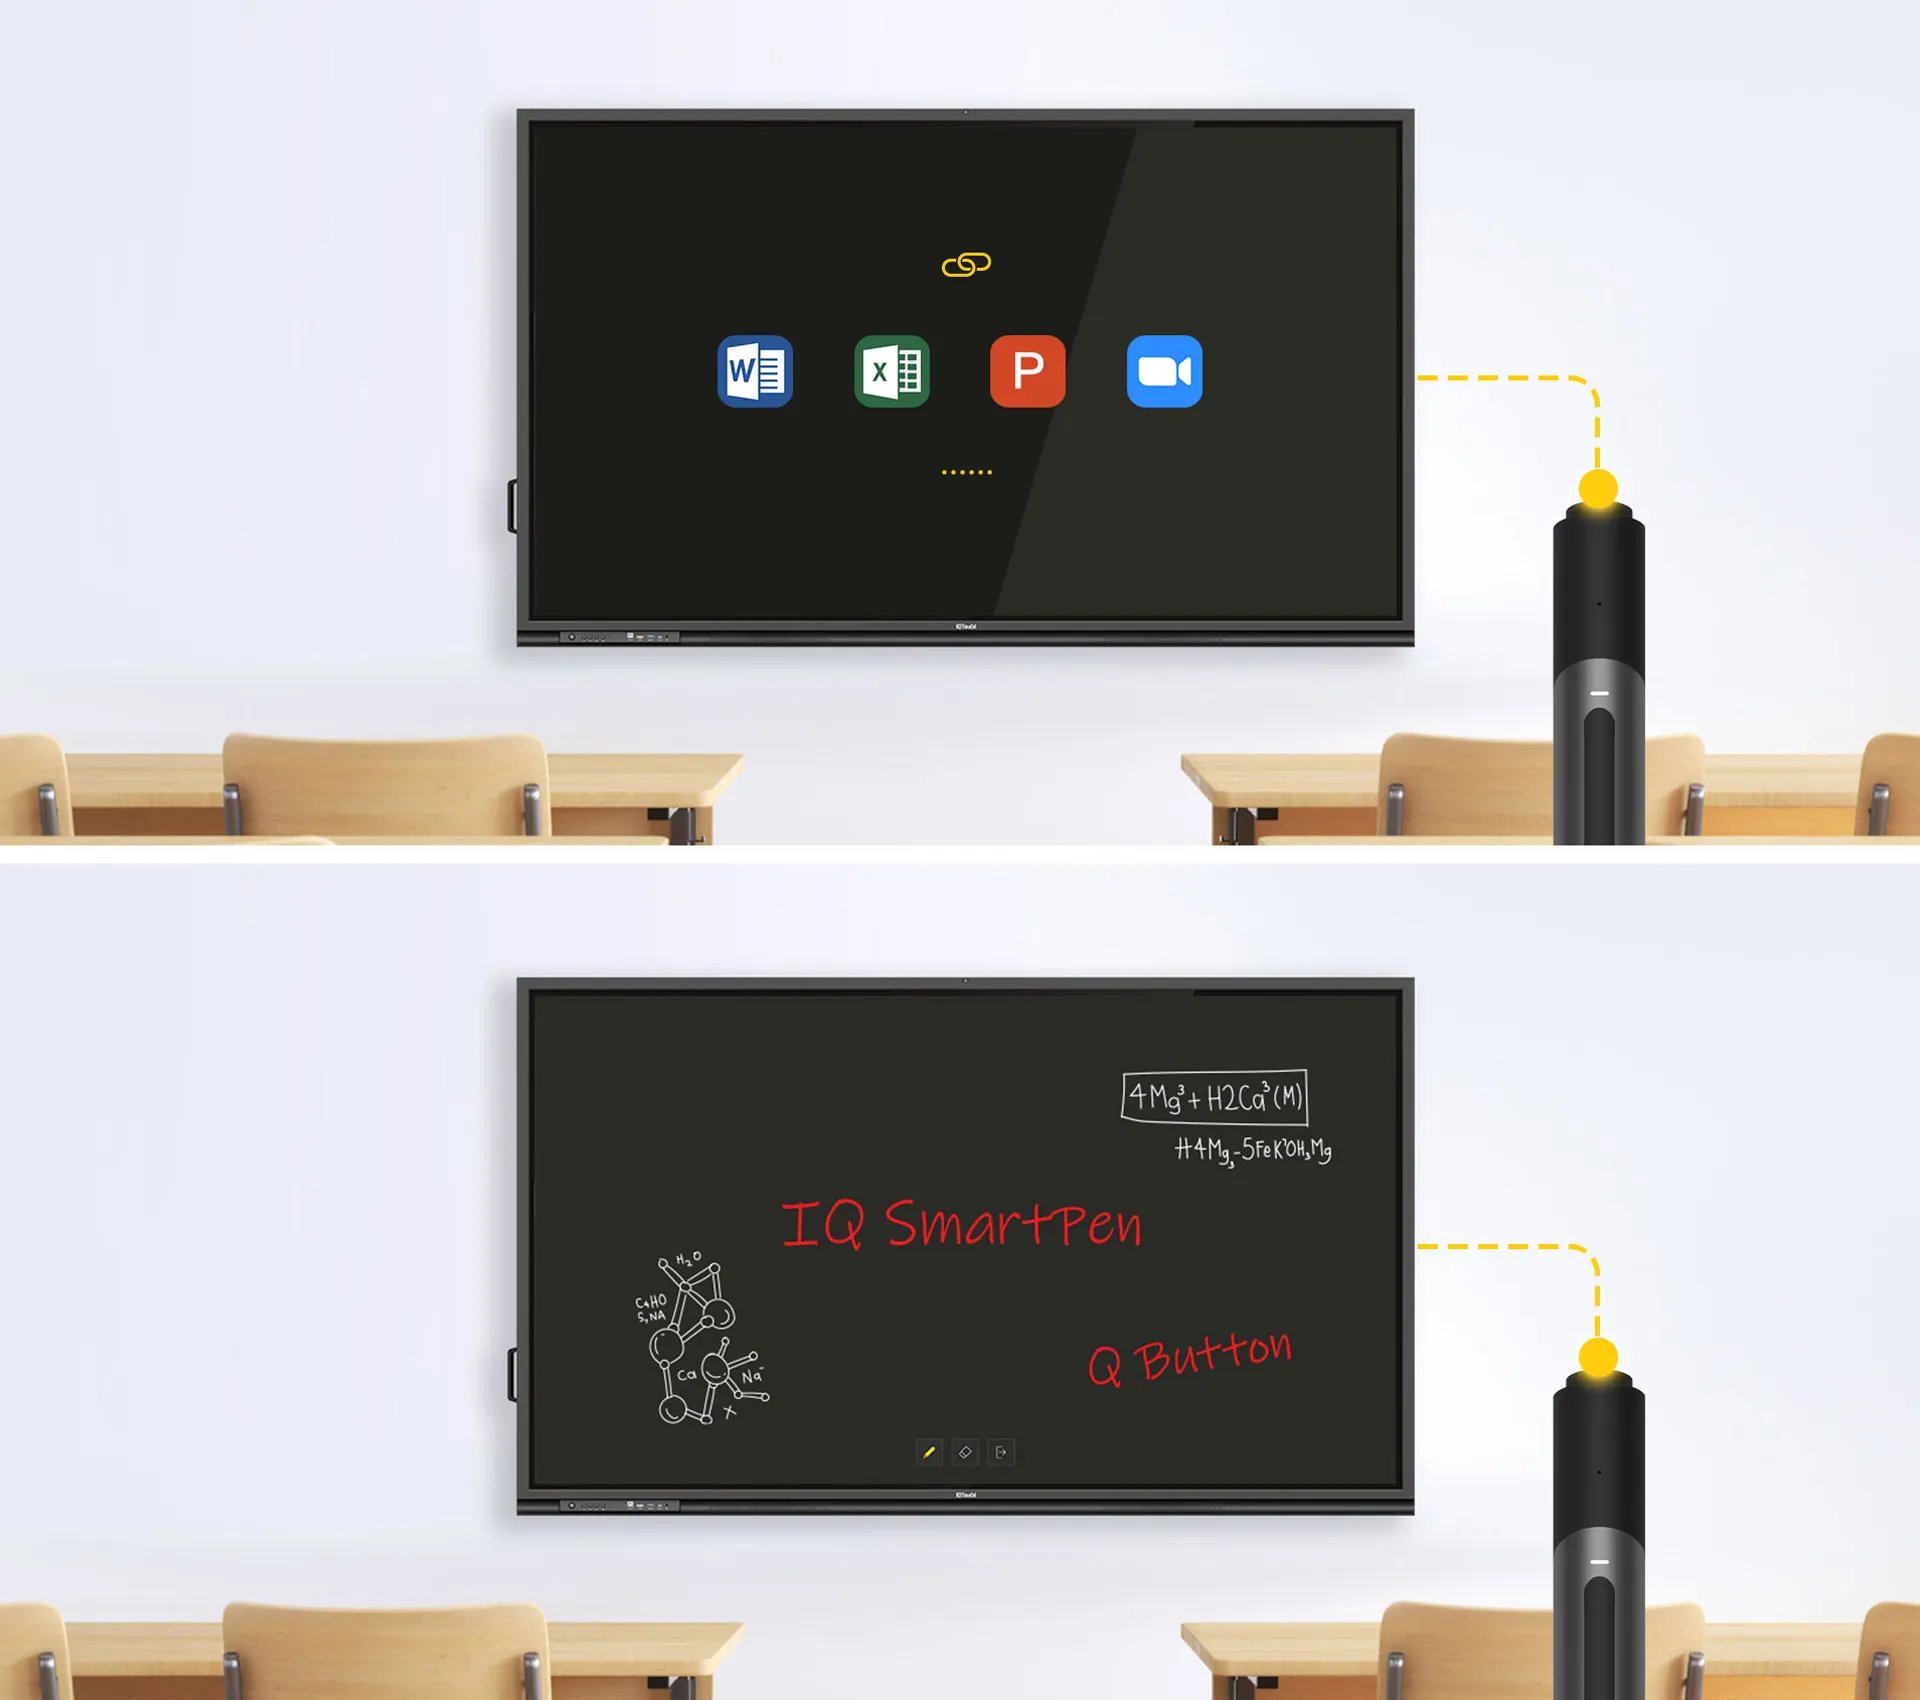 IQSmartPen with Q button for quick access to hyperlink and blackboard